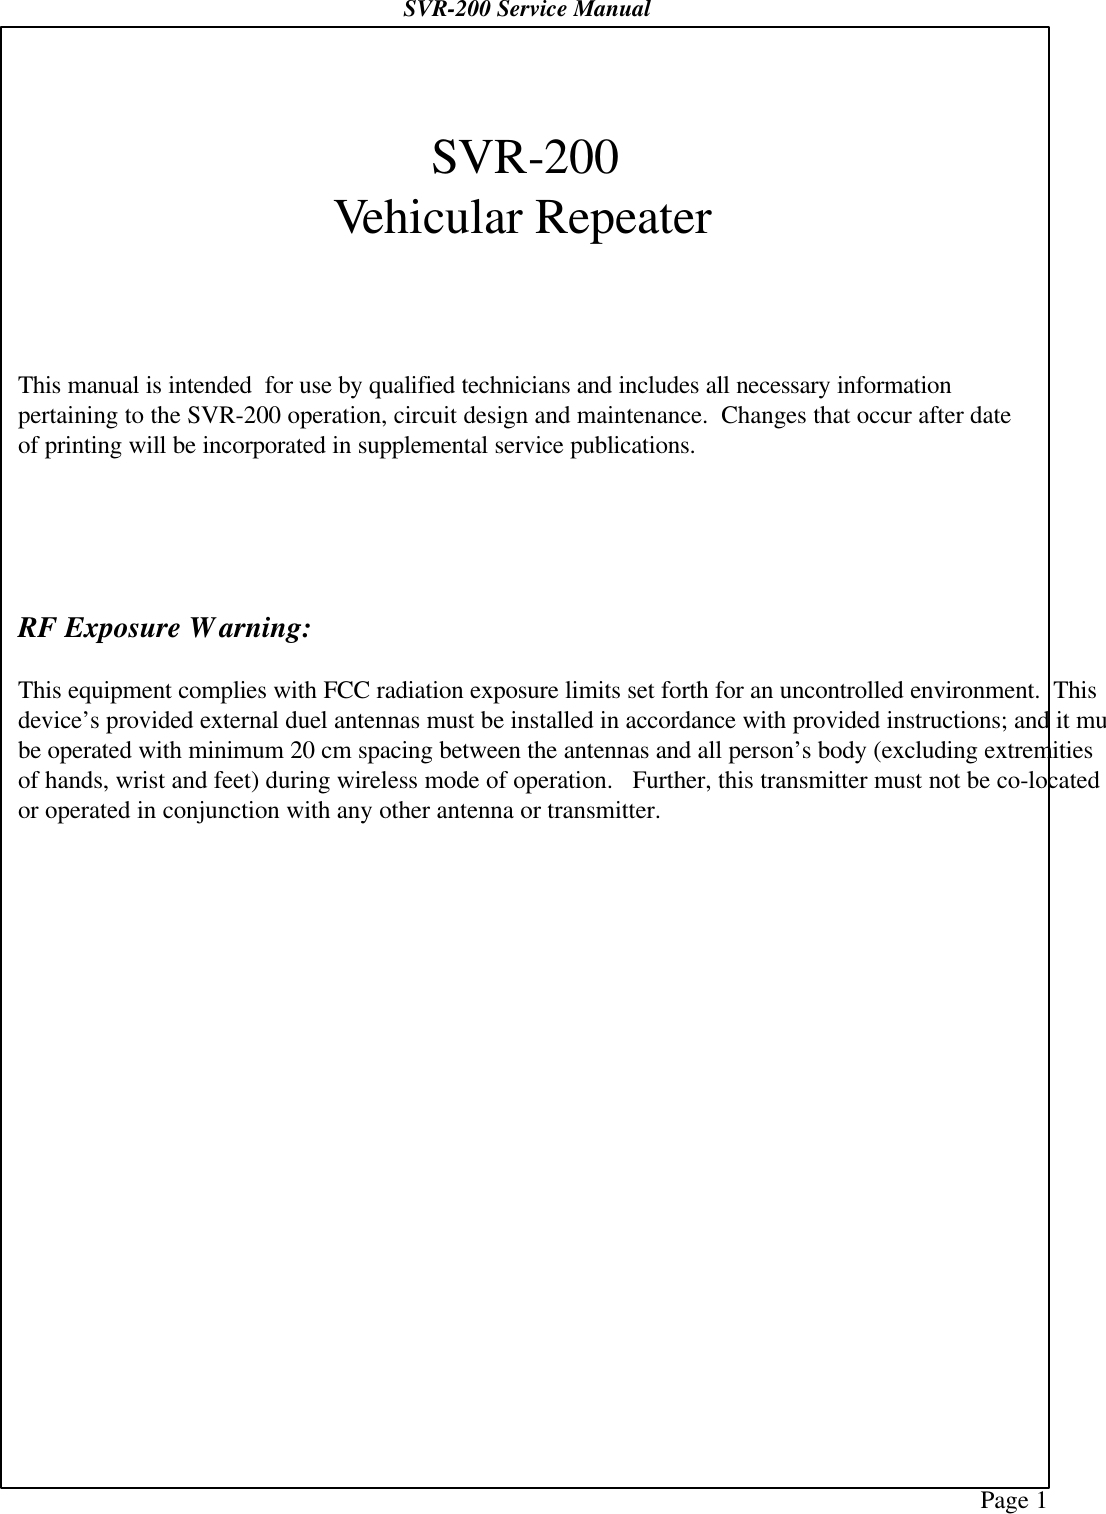 Page 1SVR-200 Service ManualSVR-200Vehicular RepeaterThis manual is intended  for use by qualified technicians and includes all necessary informationpertaining to the SVR-200 operation, circuit design and maintenance.  Changes that occur after dateof printing will be incorporated in supplemental service publications.RF Exposure Warning:This equipment complies with FCC radiation exposure limits set forth for an uncontrolled environment.  Thisdevice’s provided external duel antennas must be installed in accordance with provided instructions; and it mustbe operated with minimum 20 cm spacing between the antennas and all person’s body (excluding extremitiesof hands, wrist and feet) during wireless mode of operation.   Further, this transmitter must not be co-locatedor operated in conjunction with any other antenna or transmitter.